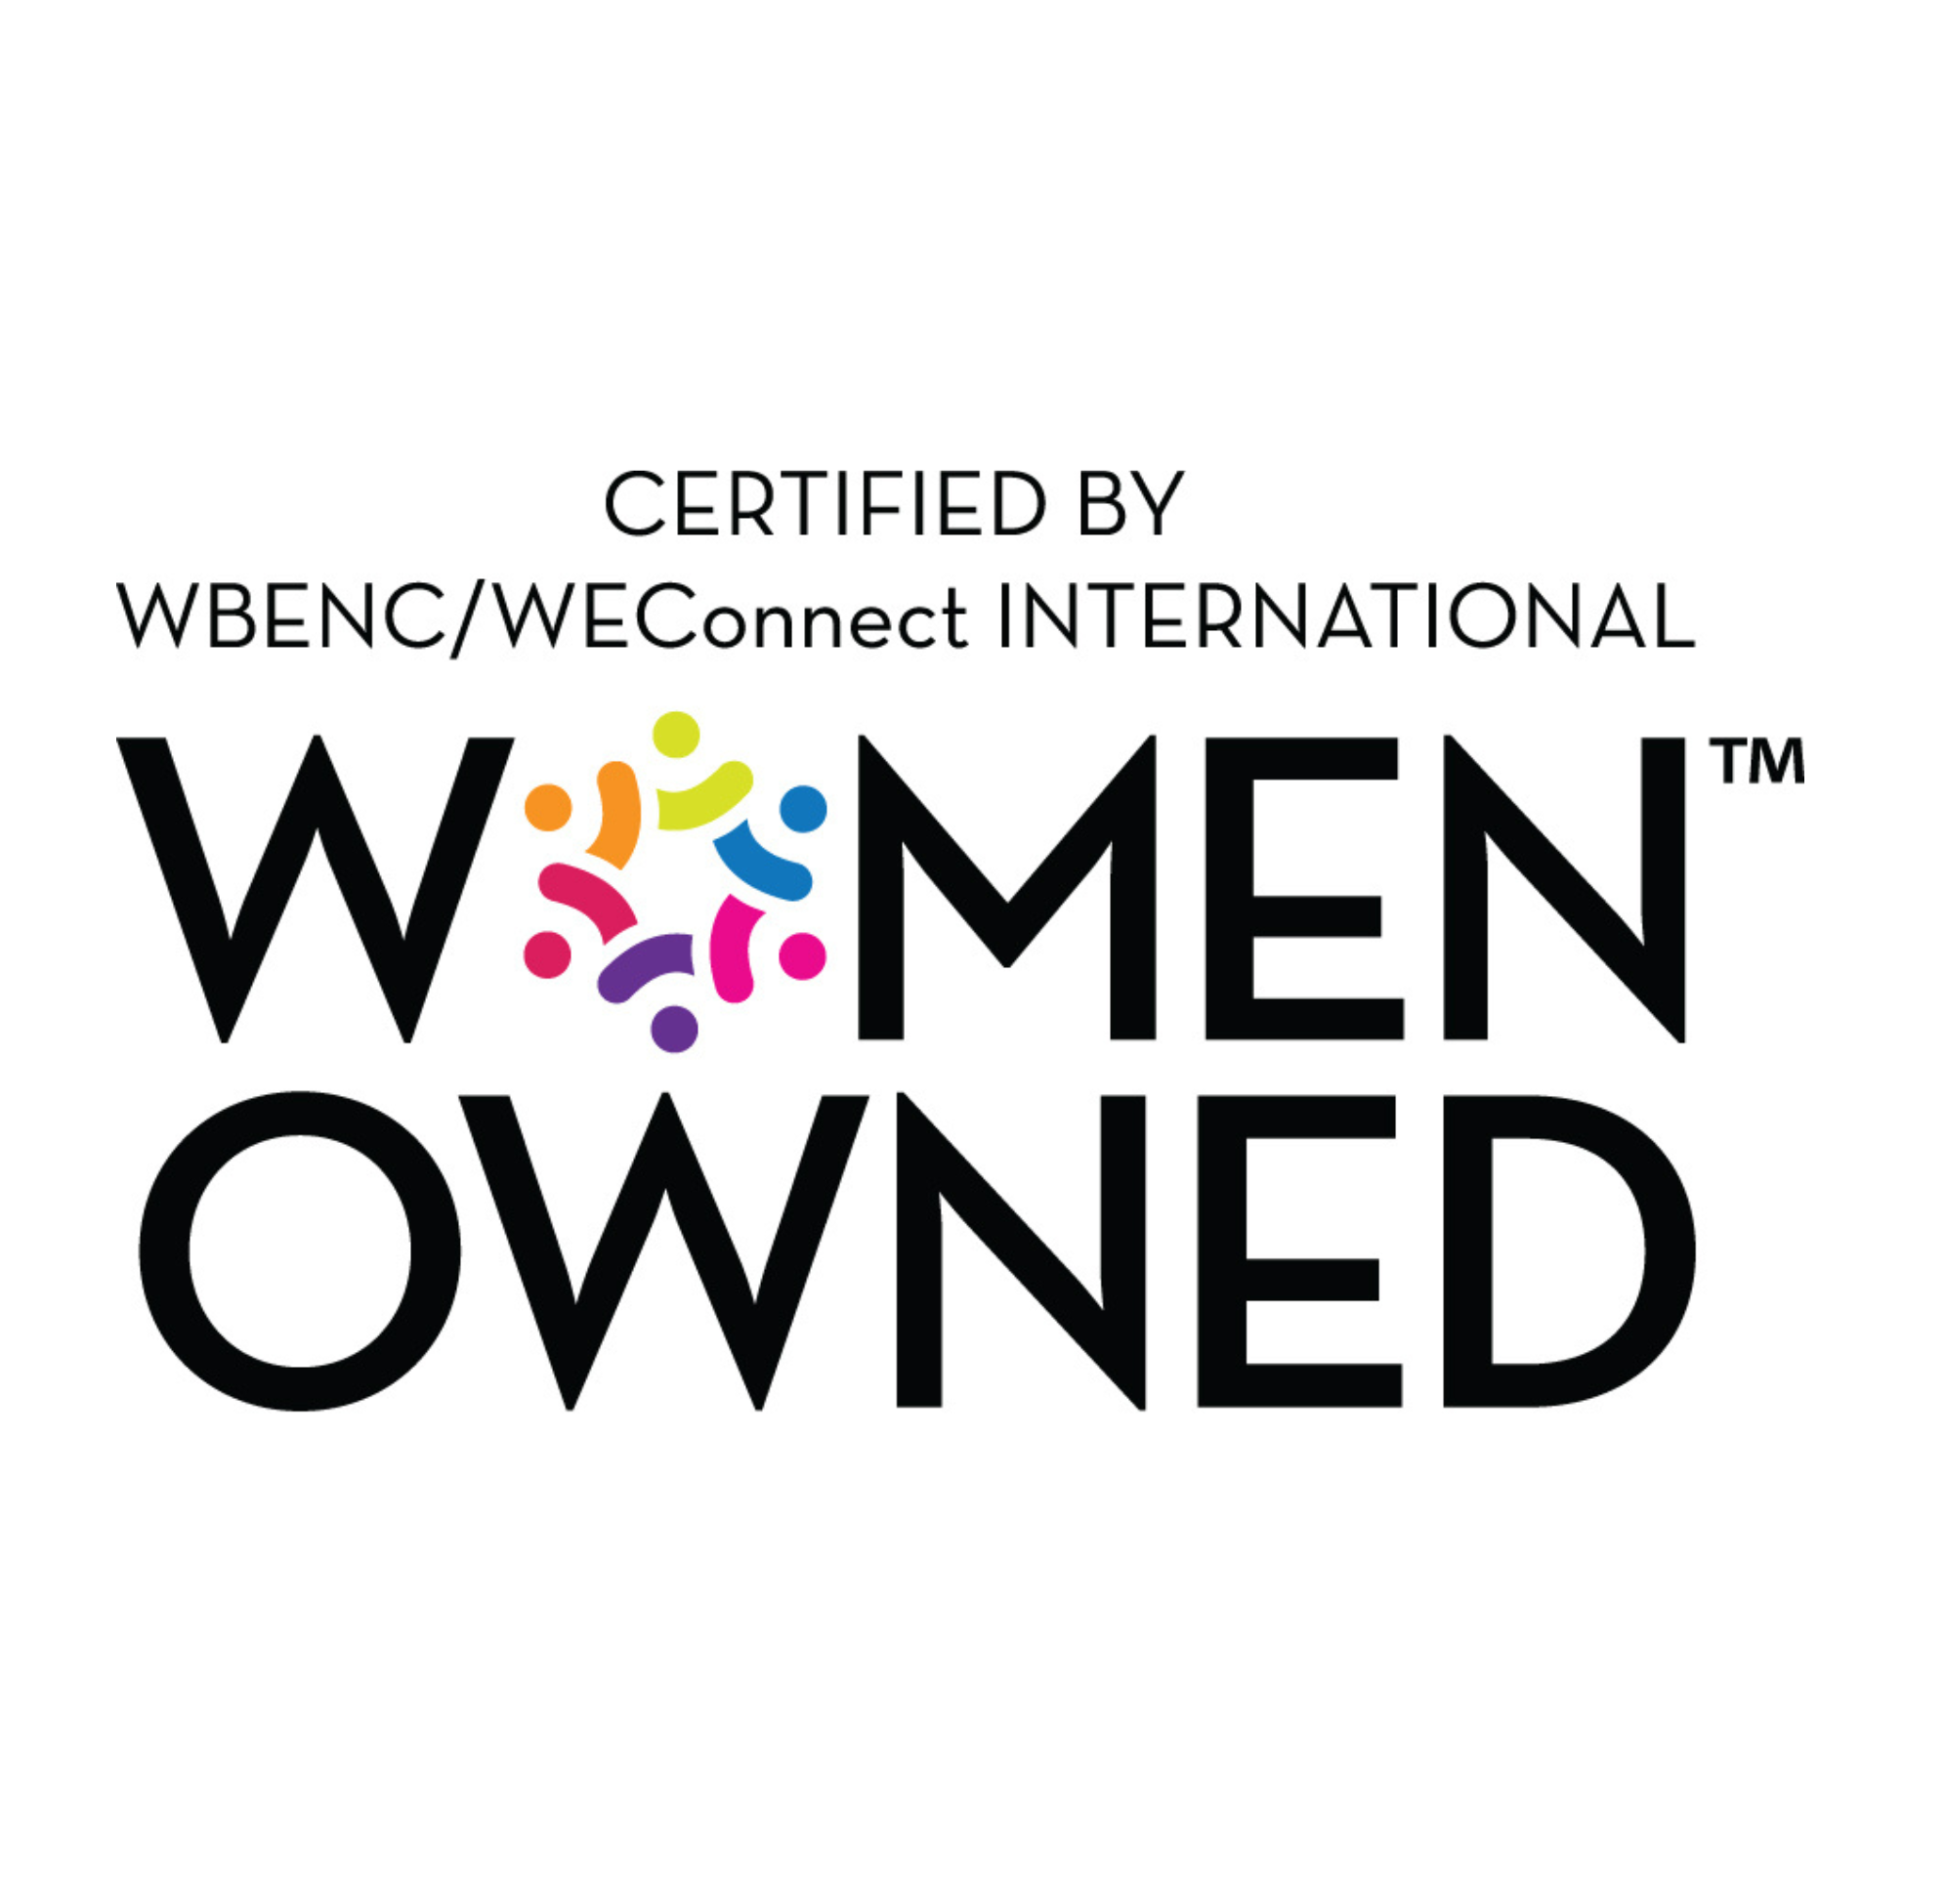 Women Owned Certification by WeConnect International